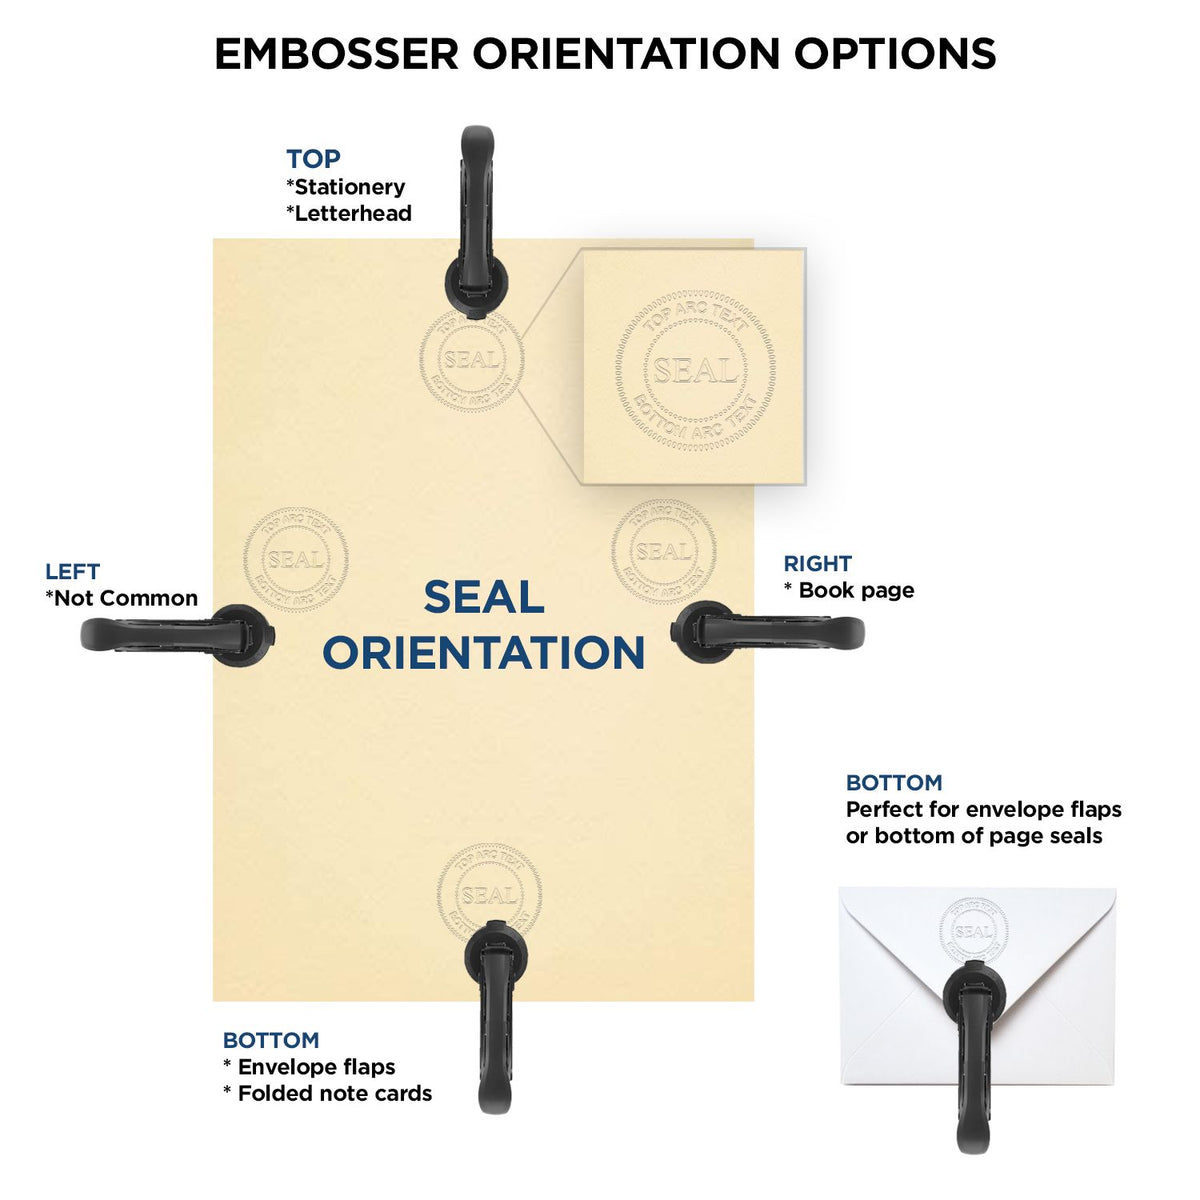 An infographic for the Heavy Duty Cast Iron Maine Geologist Seal Embosser showing embosser orientation, this is showing examples of a top, bottom, right and left insert.